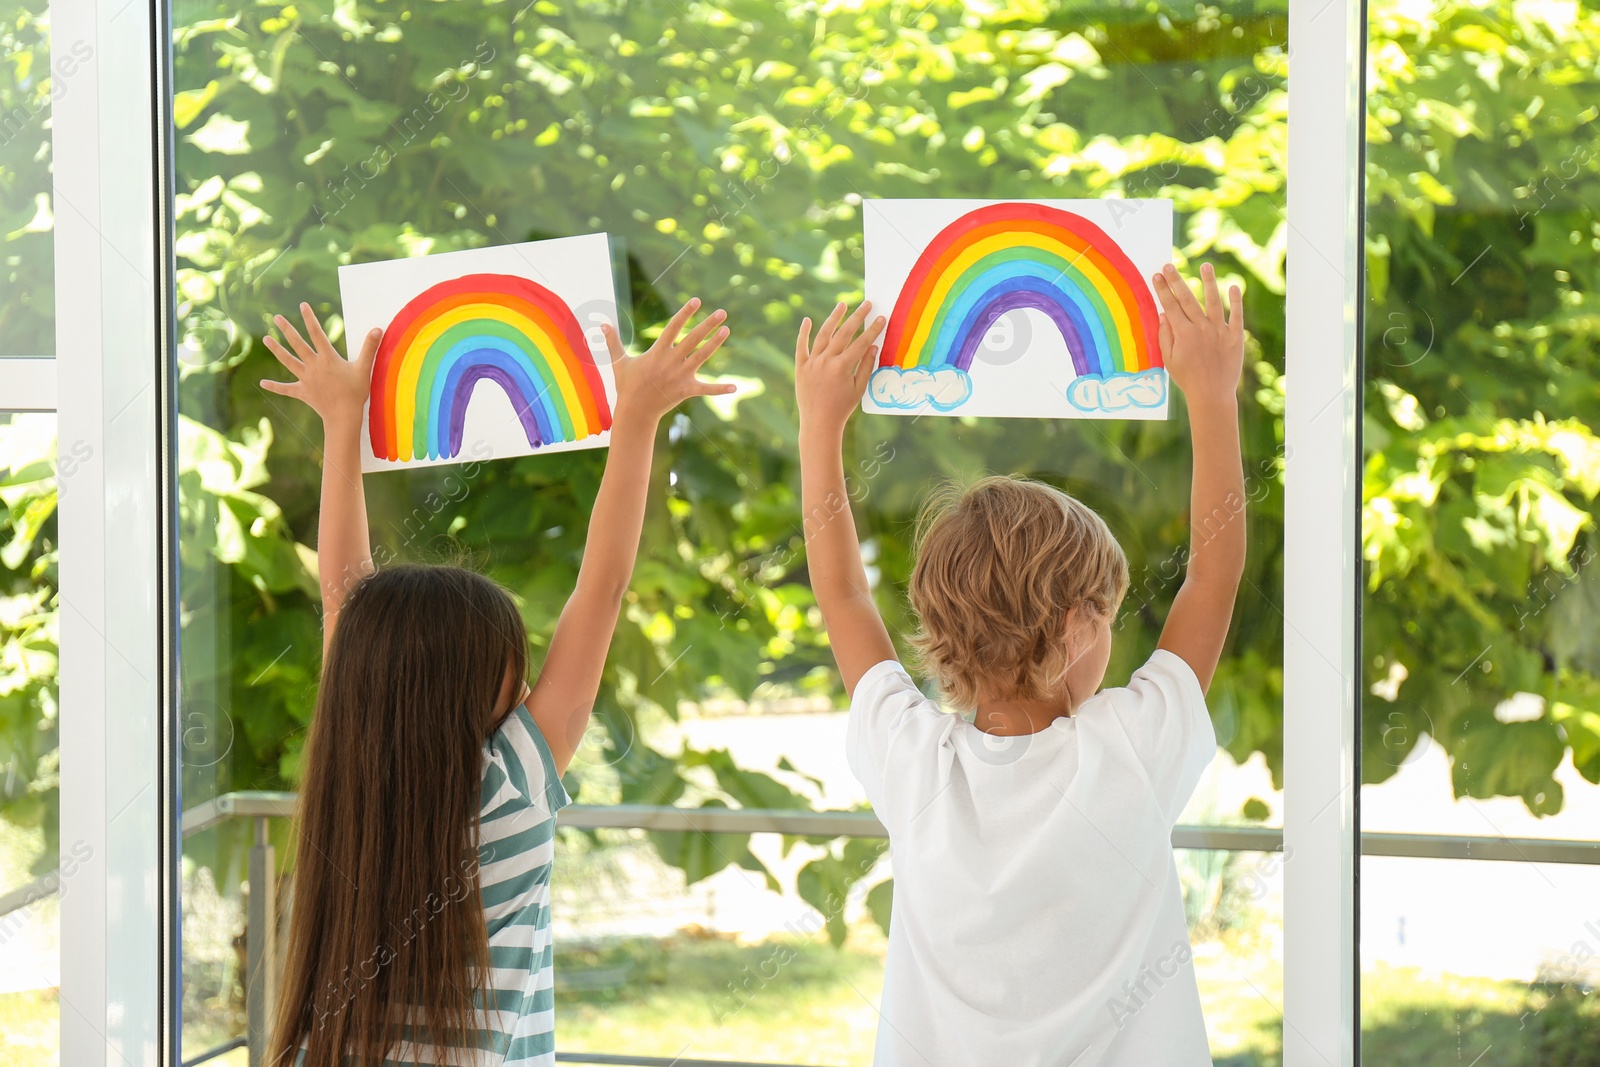 Photo of Little children holding rainbow paintings near window indoors, back view. Stay at home concept